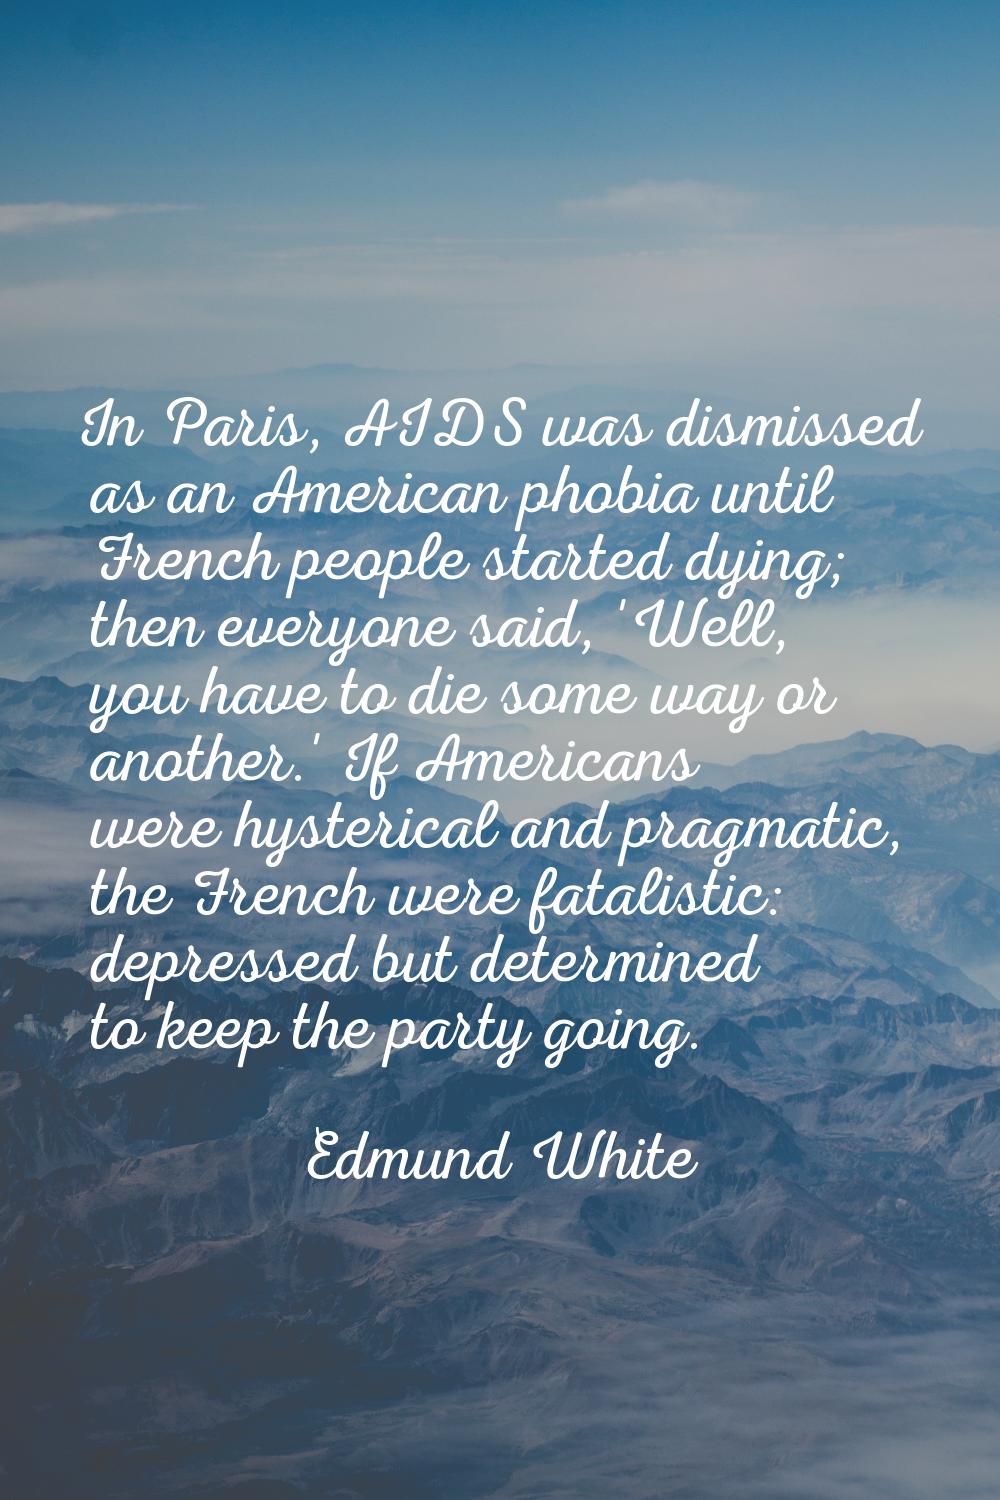 In Paris, AIDS was dismissed as an American phobia until French people started dying; then everyone